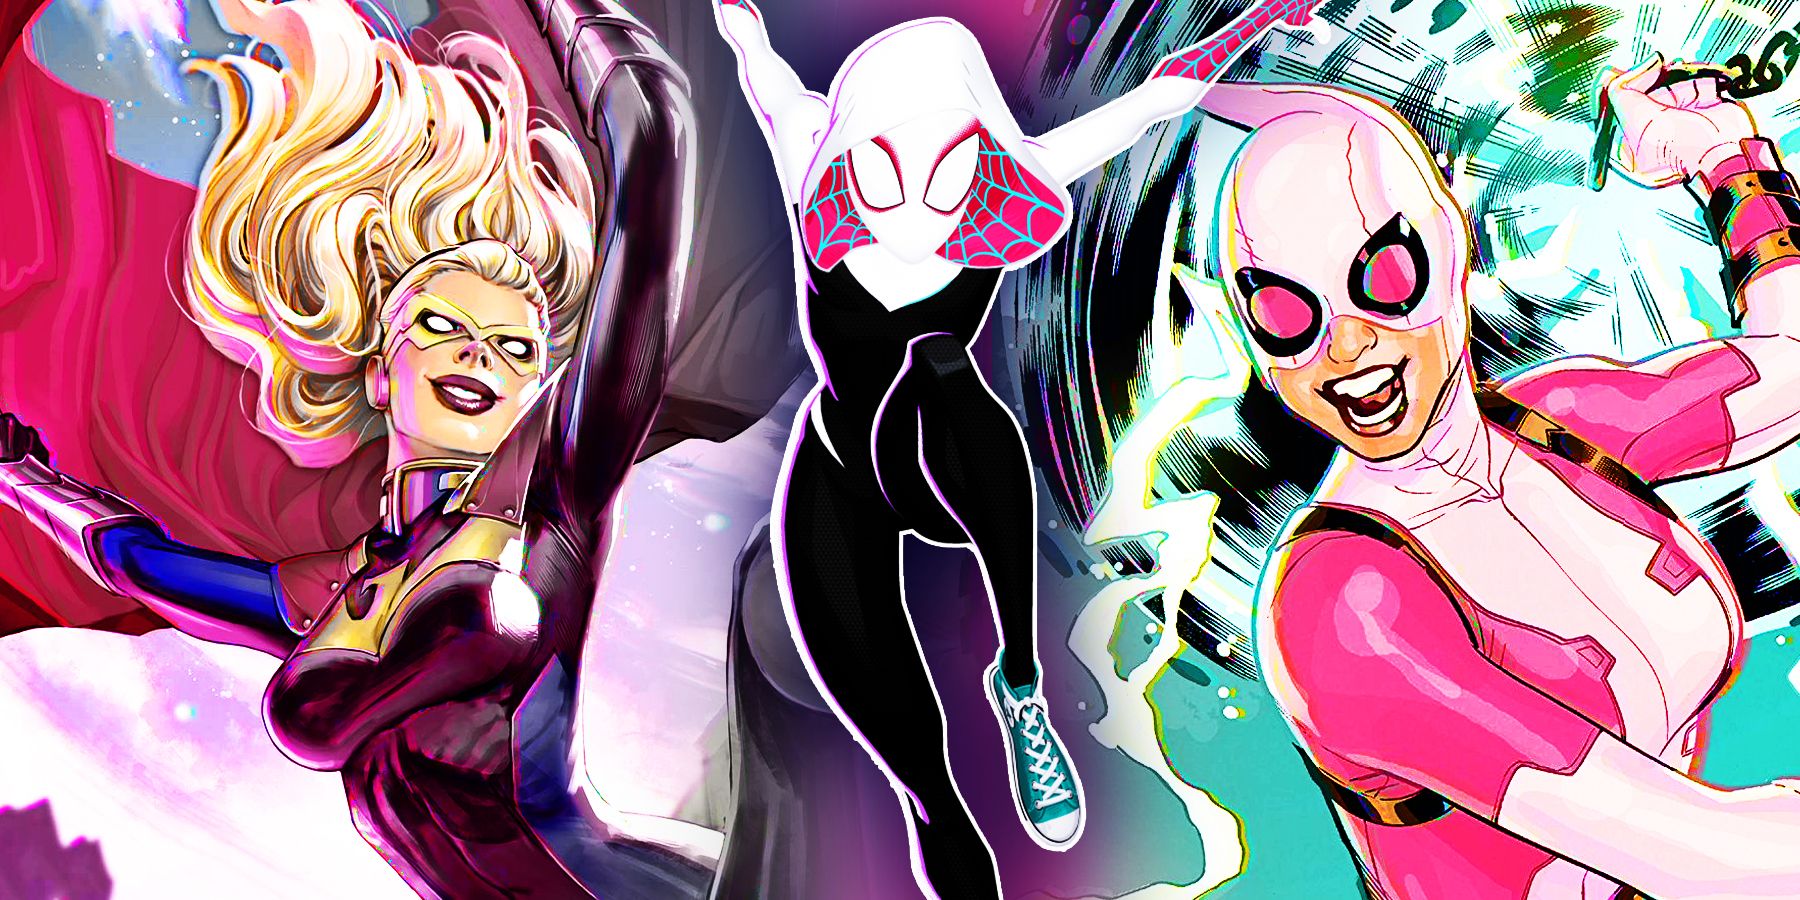 Night-Gwen of comic Heroes Reborn, Spider-Gwen and Gwenpool of Marvel comics